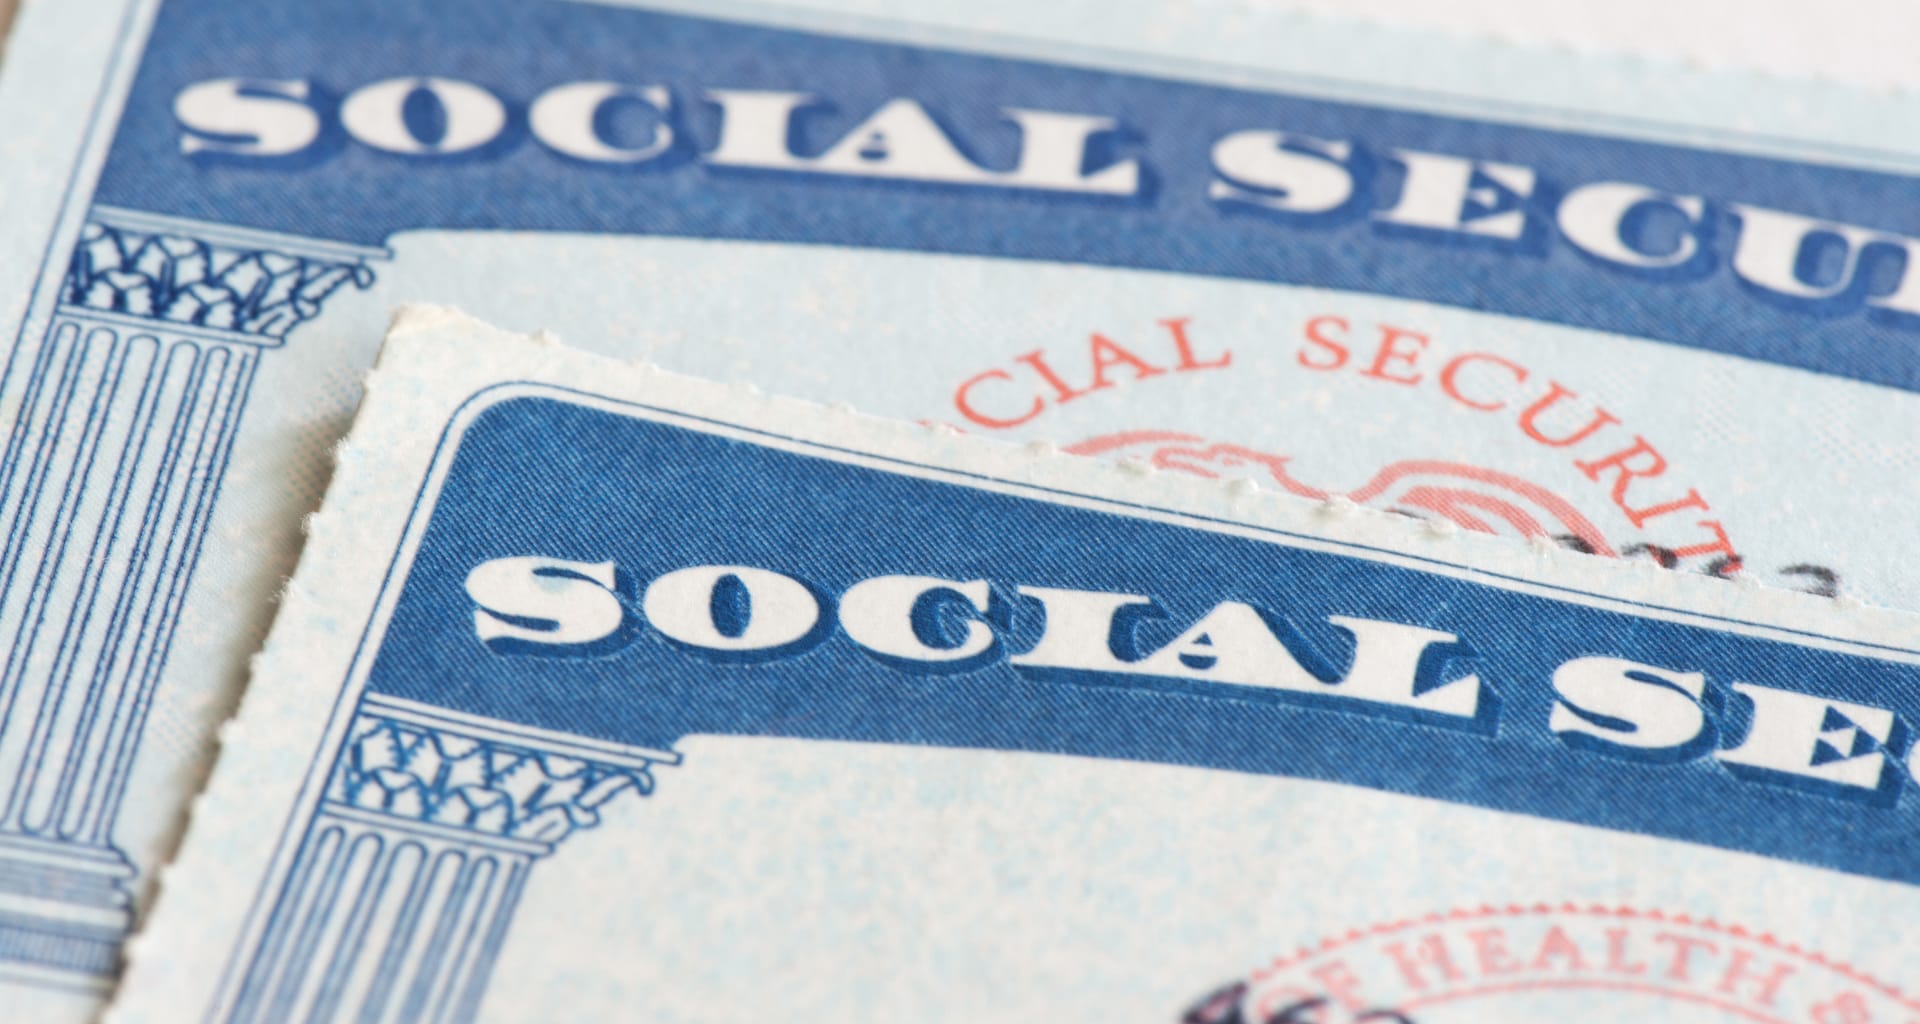 social security cards gettyimages